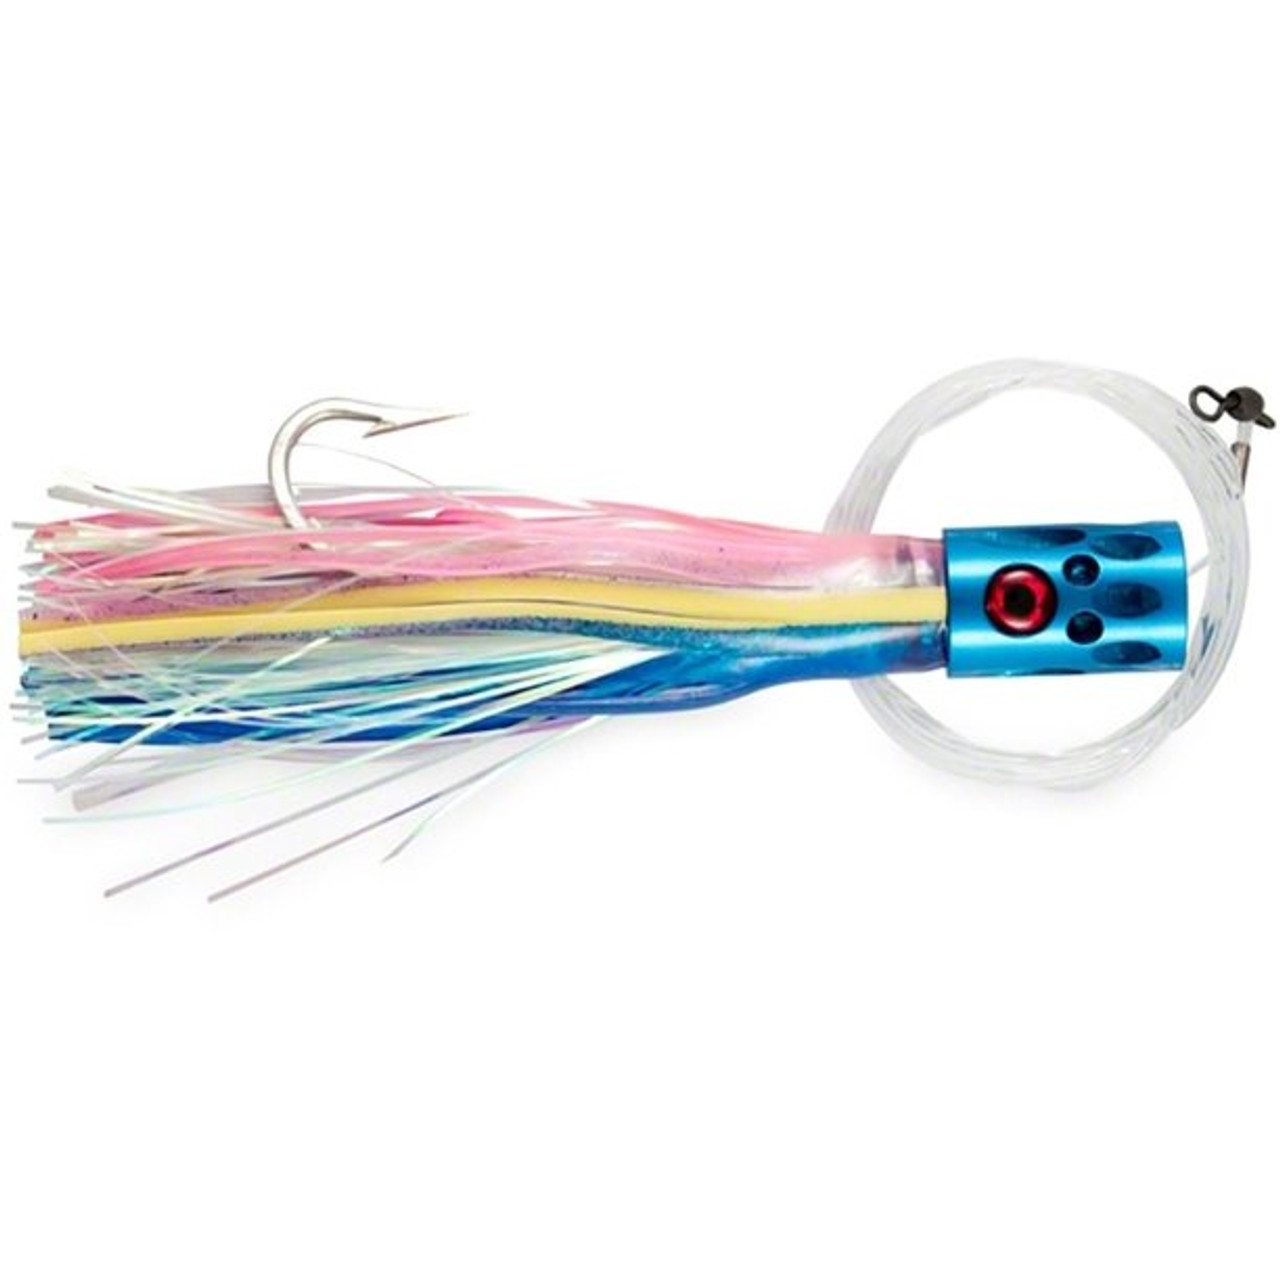 Billy Baits Magnum Turbo Whistler Rigged Blue/Pink